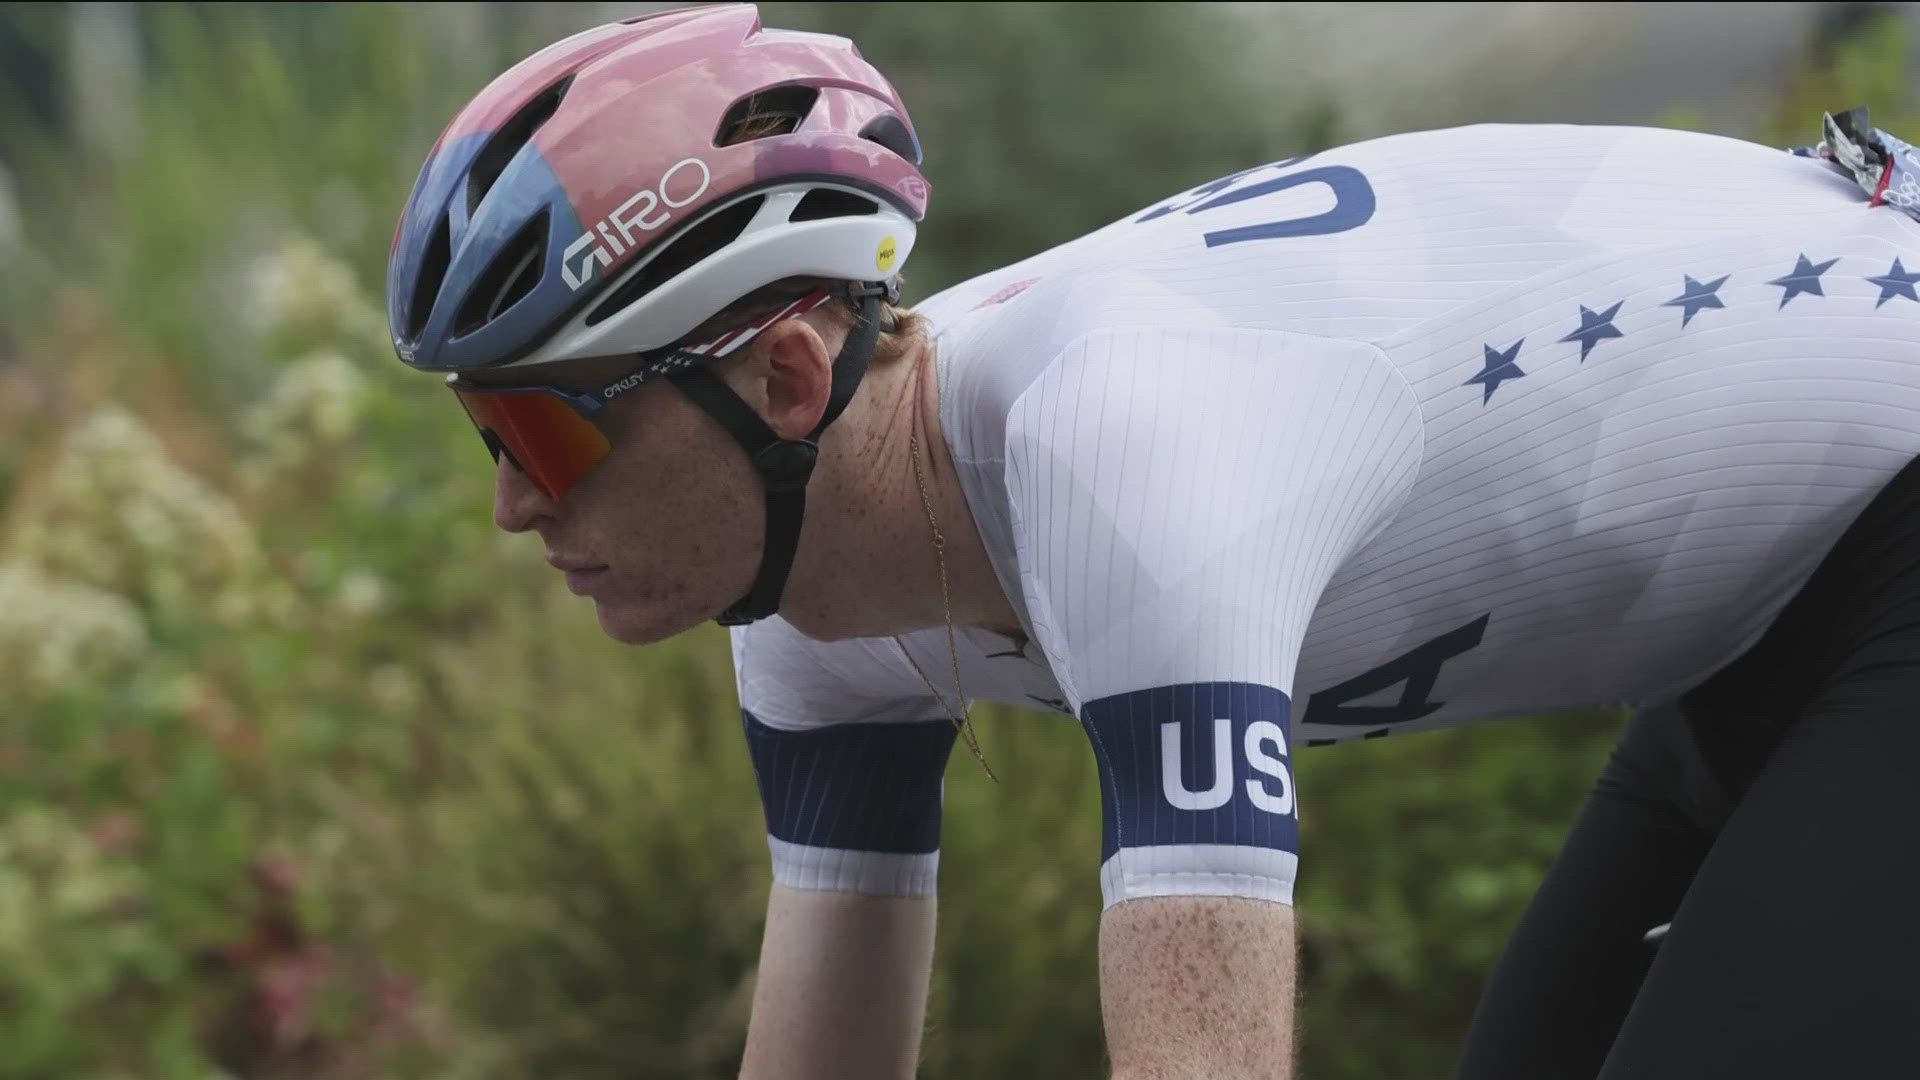 The Boise High grad finished as the top American in both the Olympic road race on Saturday and the Tour de France in July.